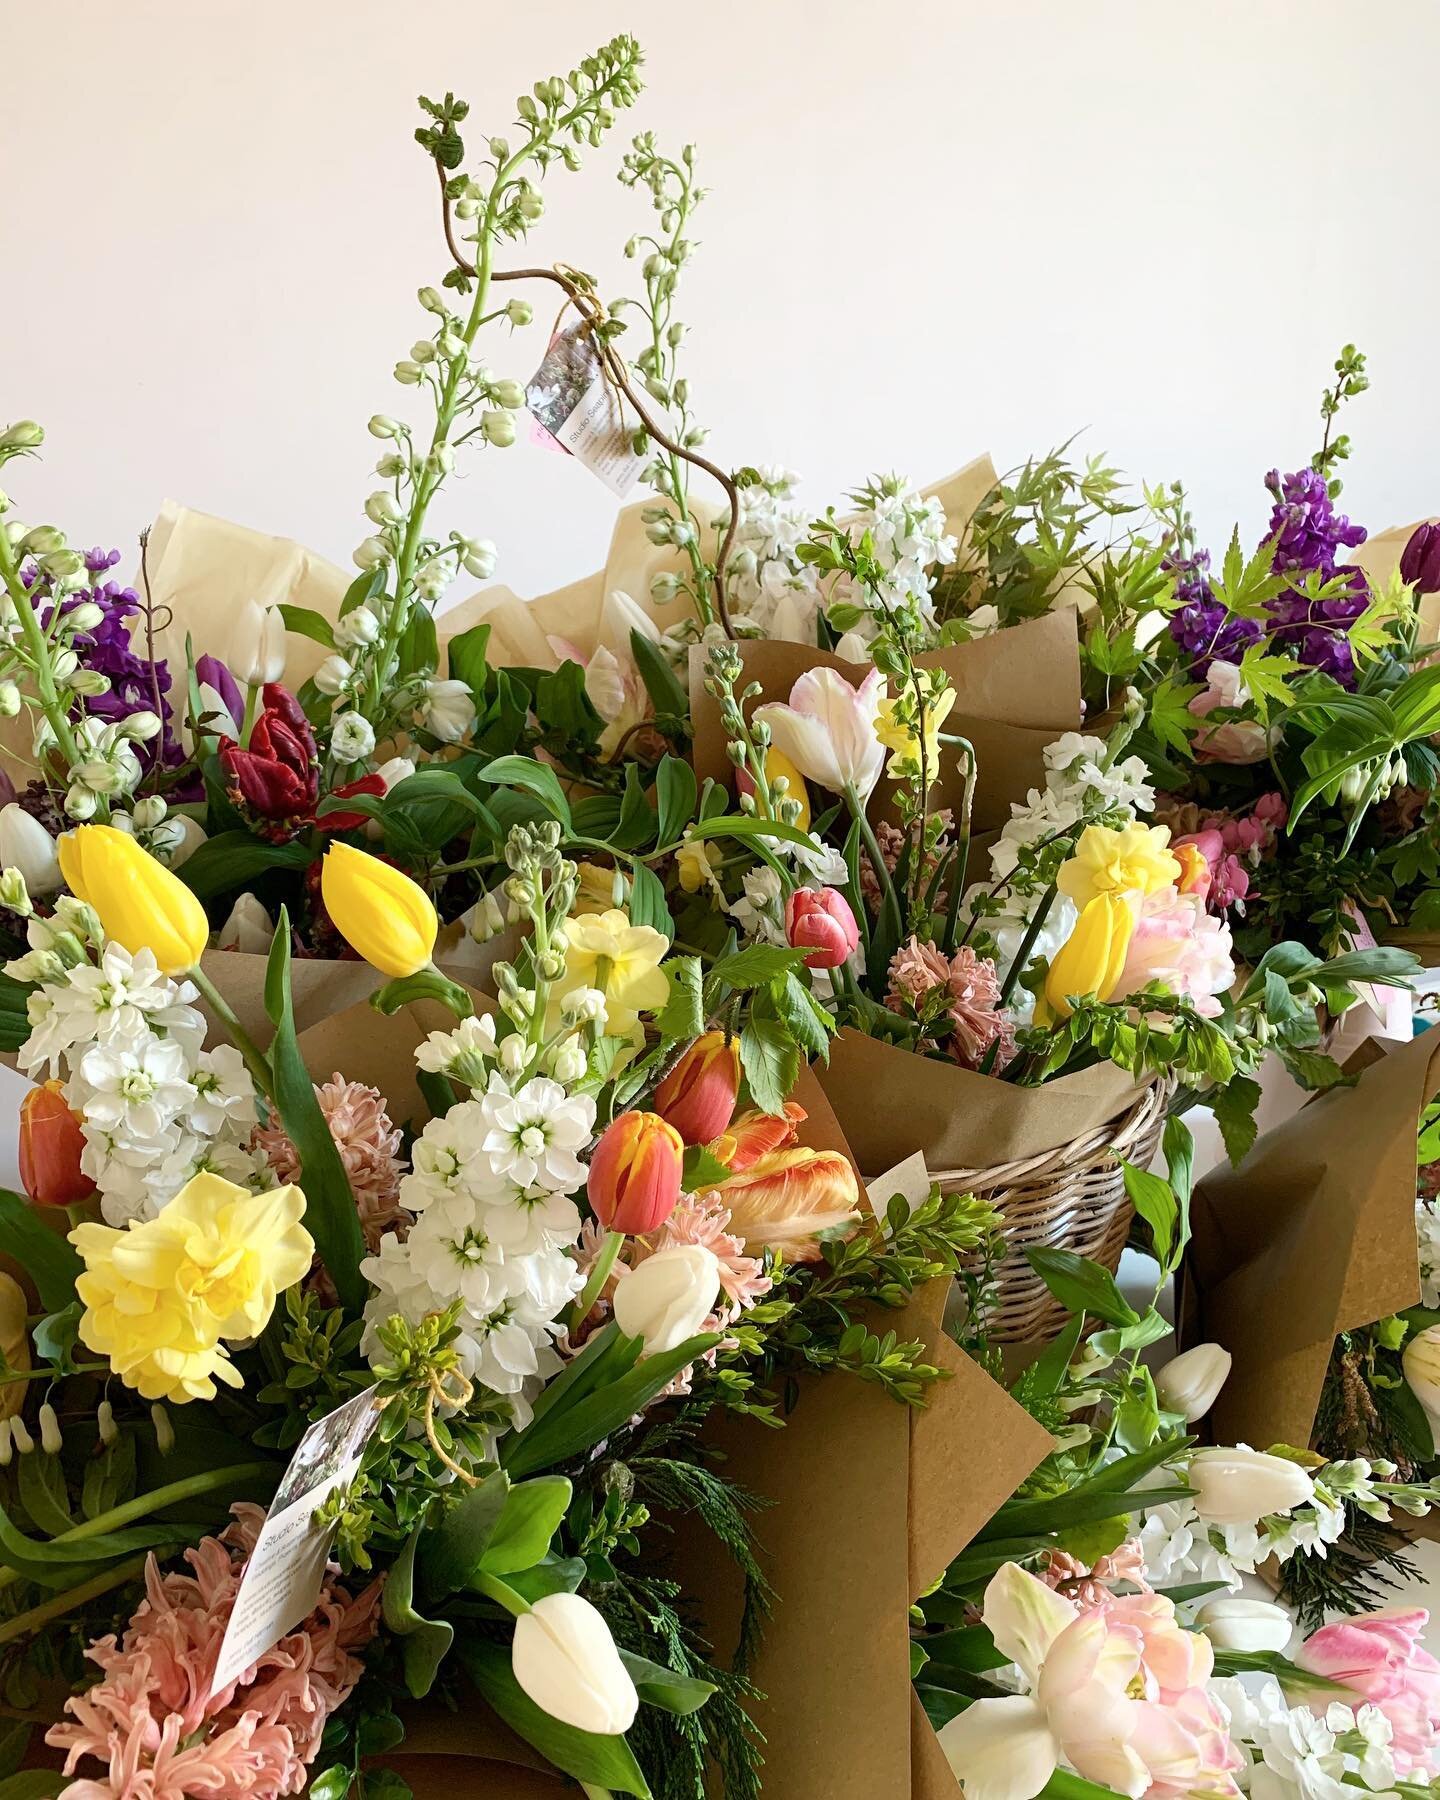 Easter blooms 🐣 🌸
Our Spring flower posies are now available to order! I can&rsquo;t wait to bring you the finest selection of local &amp; British blooms to celebrate the joy of the season (and Easter if you wish) - for your home or as a lovely gif